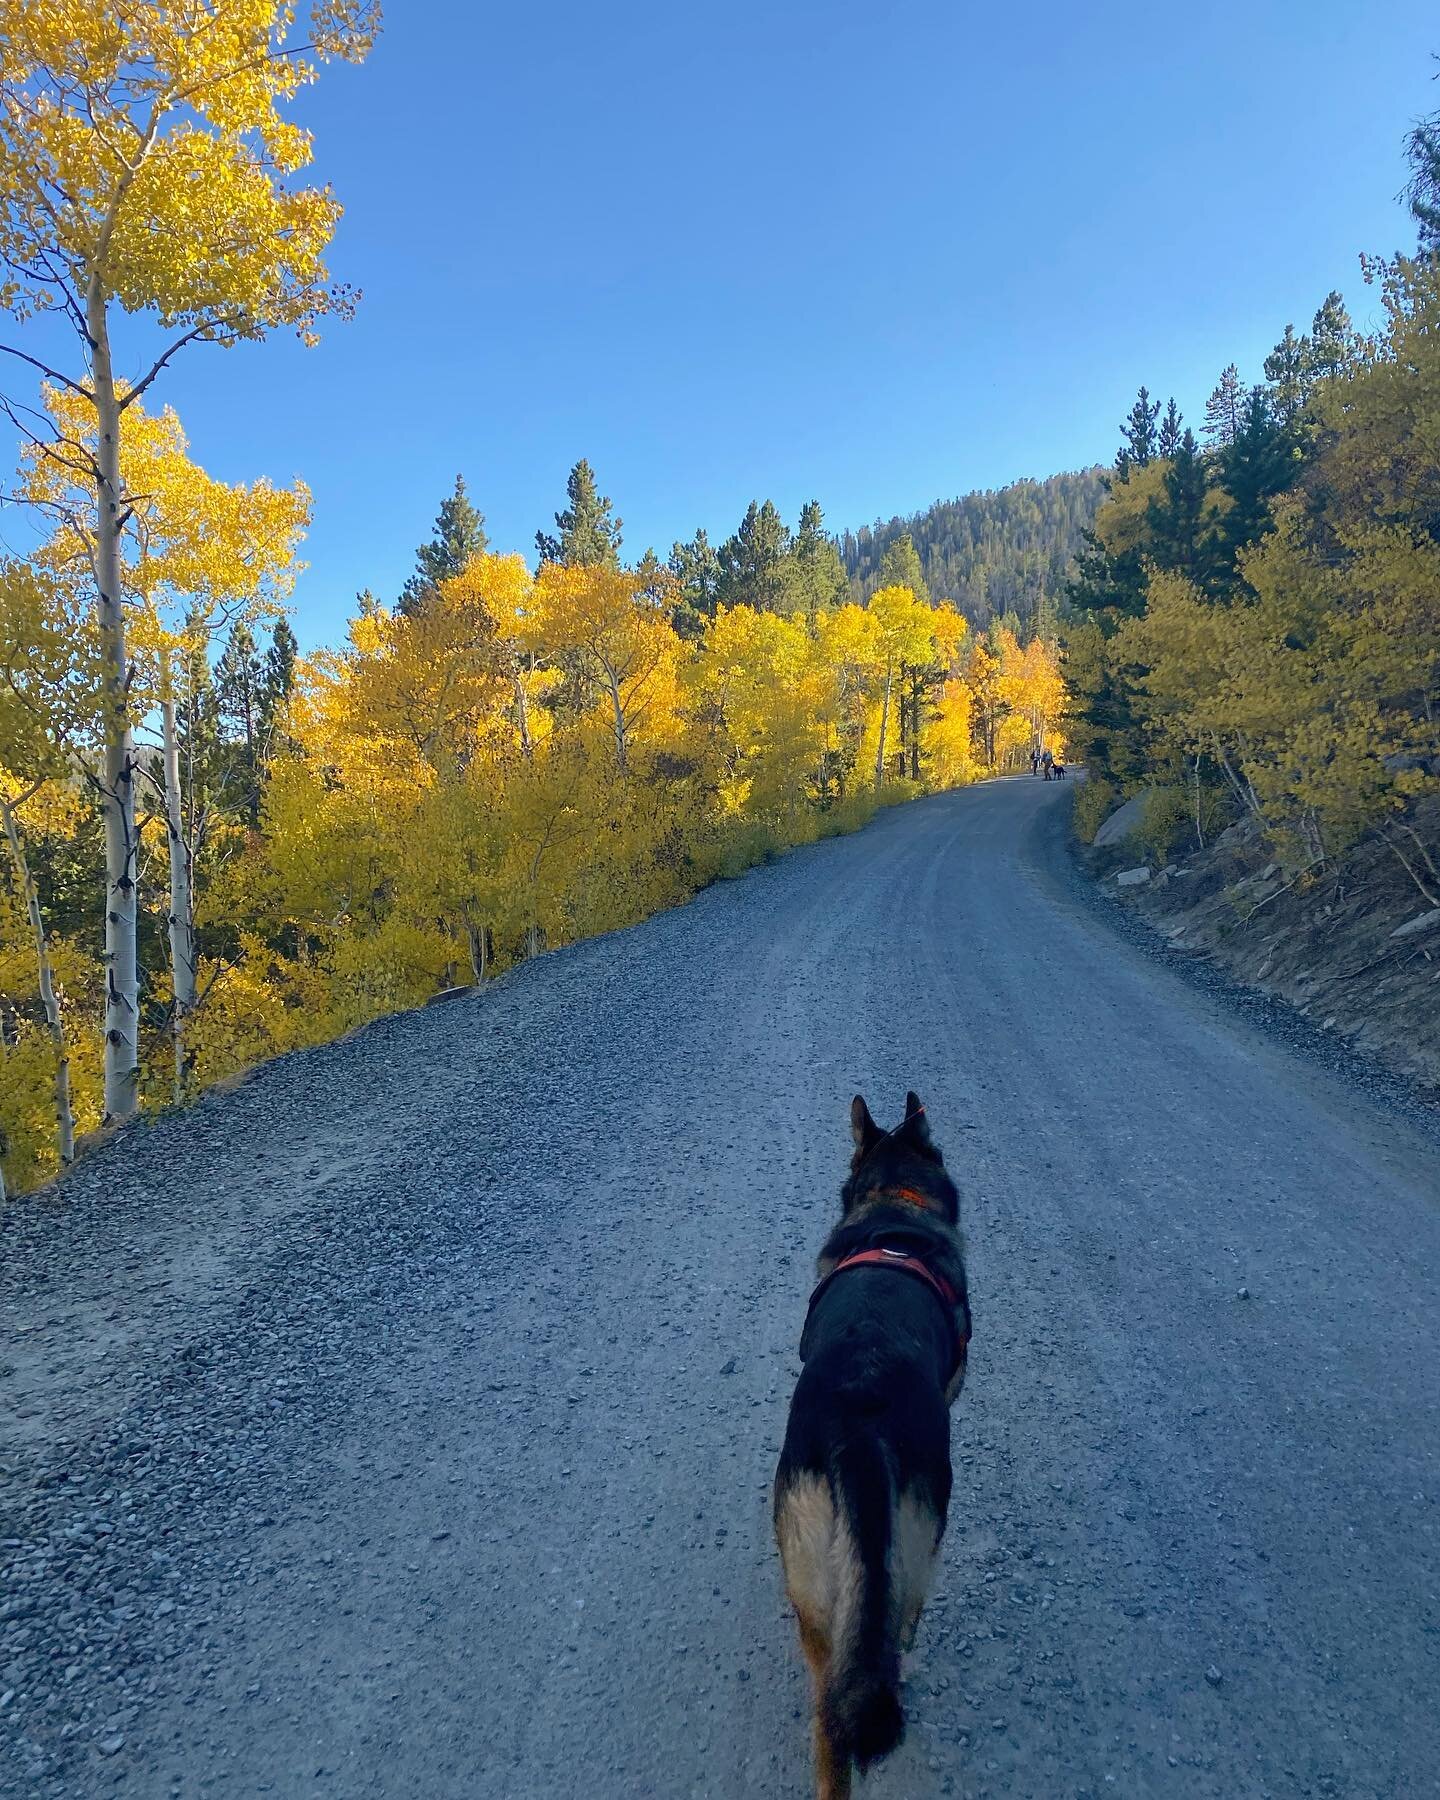 Another day, another search. Beautiful fall colors up in Wyoming as K9 Boone and his handler work their area. 

#searchandrescue #sark9 #germanshepherd #gsd #workinglinegsd #adventure #getoutside #searchdogsofig #puppiesofinstagram #idaho #pnw #wyomi